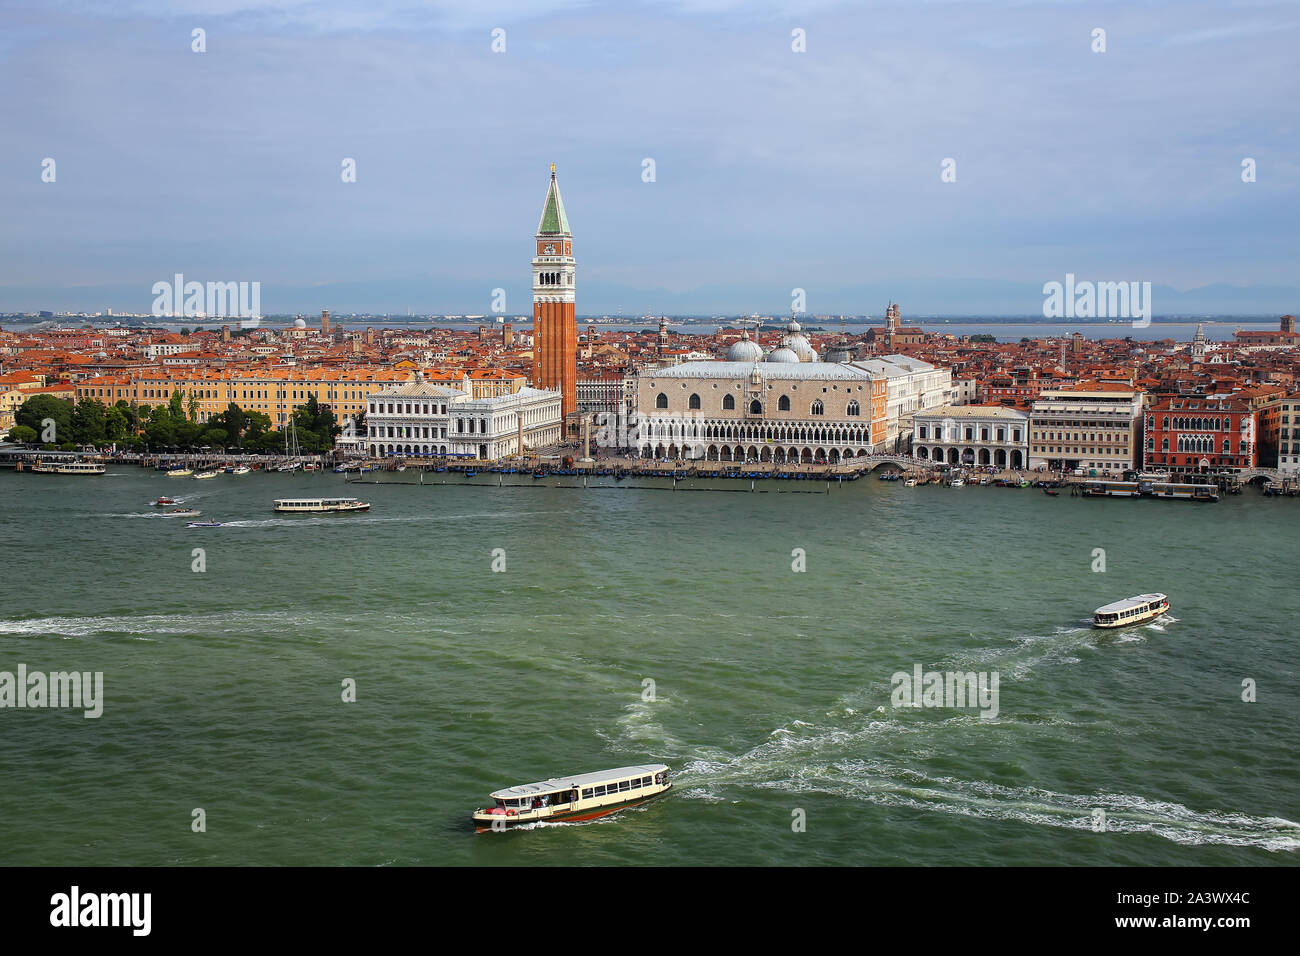 View of Piazza San Marco with Campanile, Palazzo Ducale and Biblioteca in Venice, Italy. IThese buildings are the most recognizable symbols of the cit Stock Photo